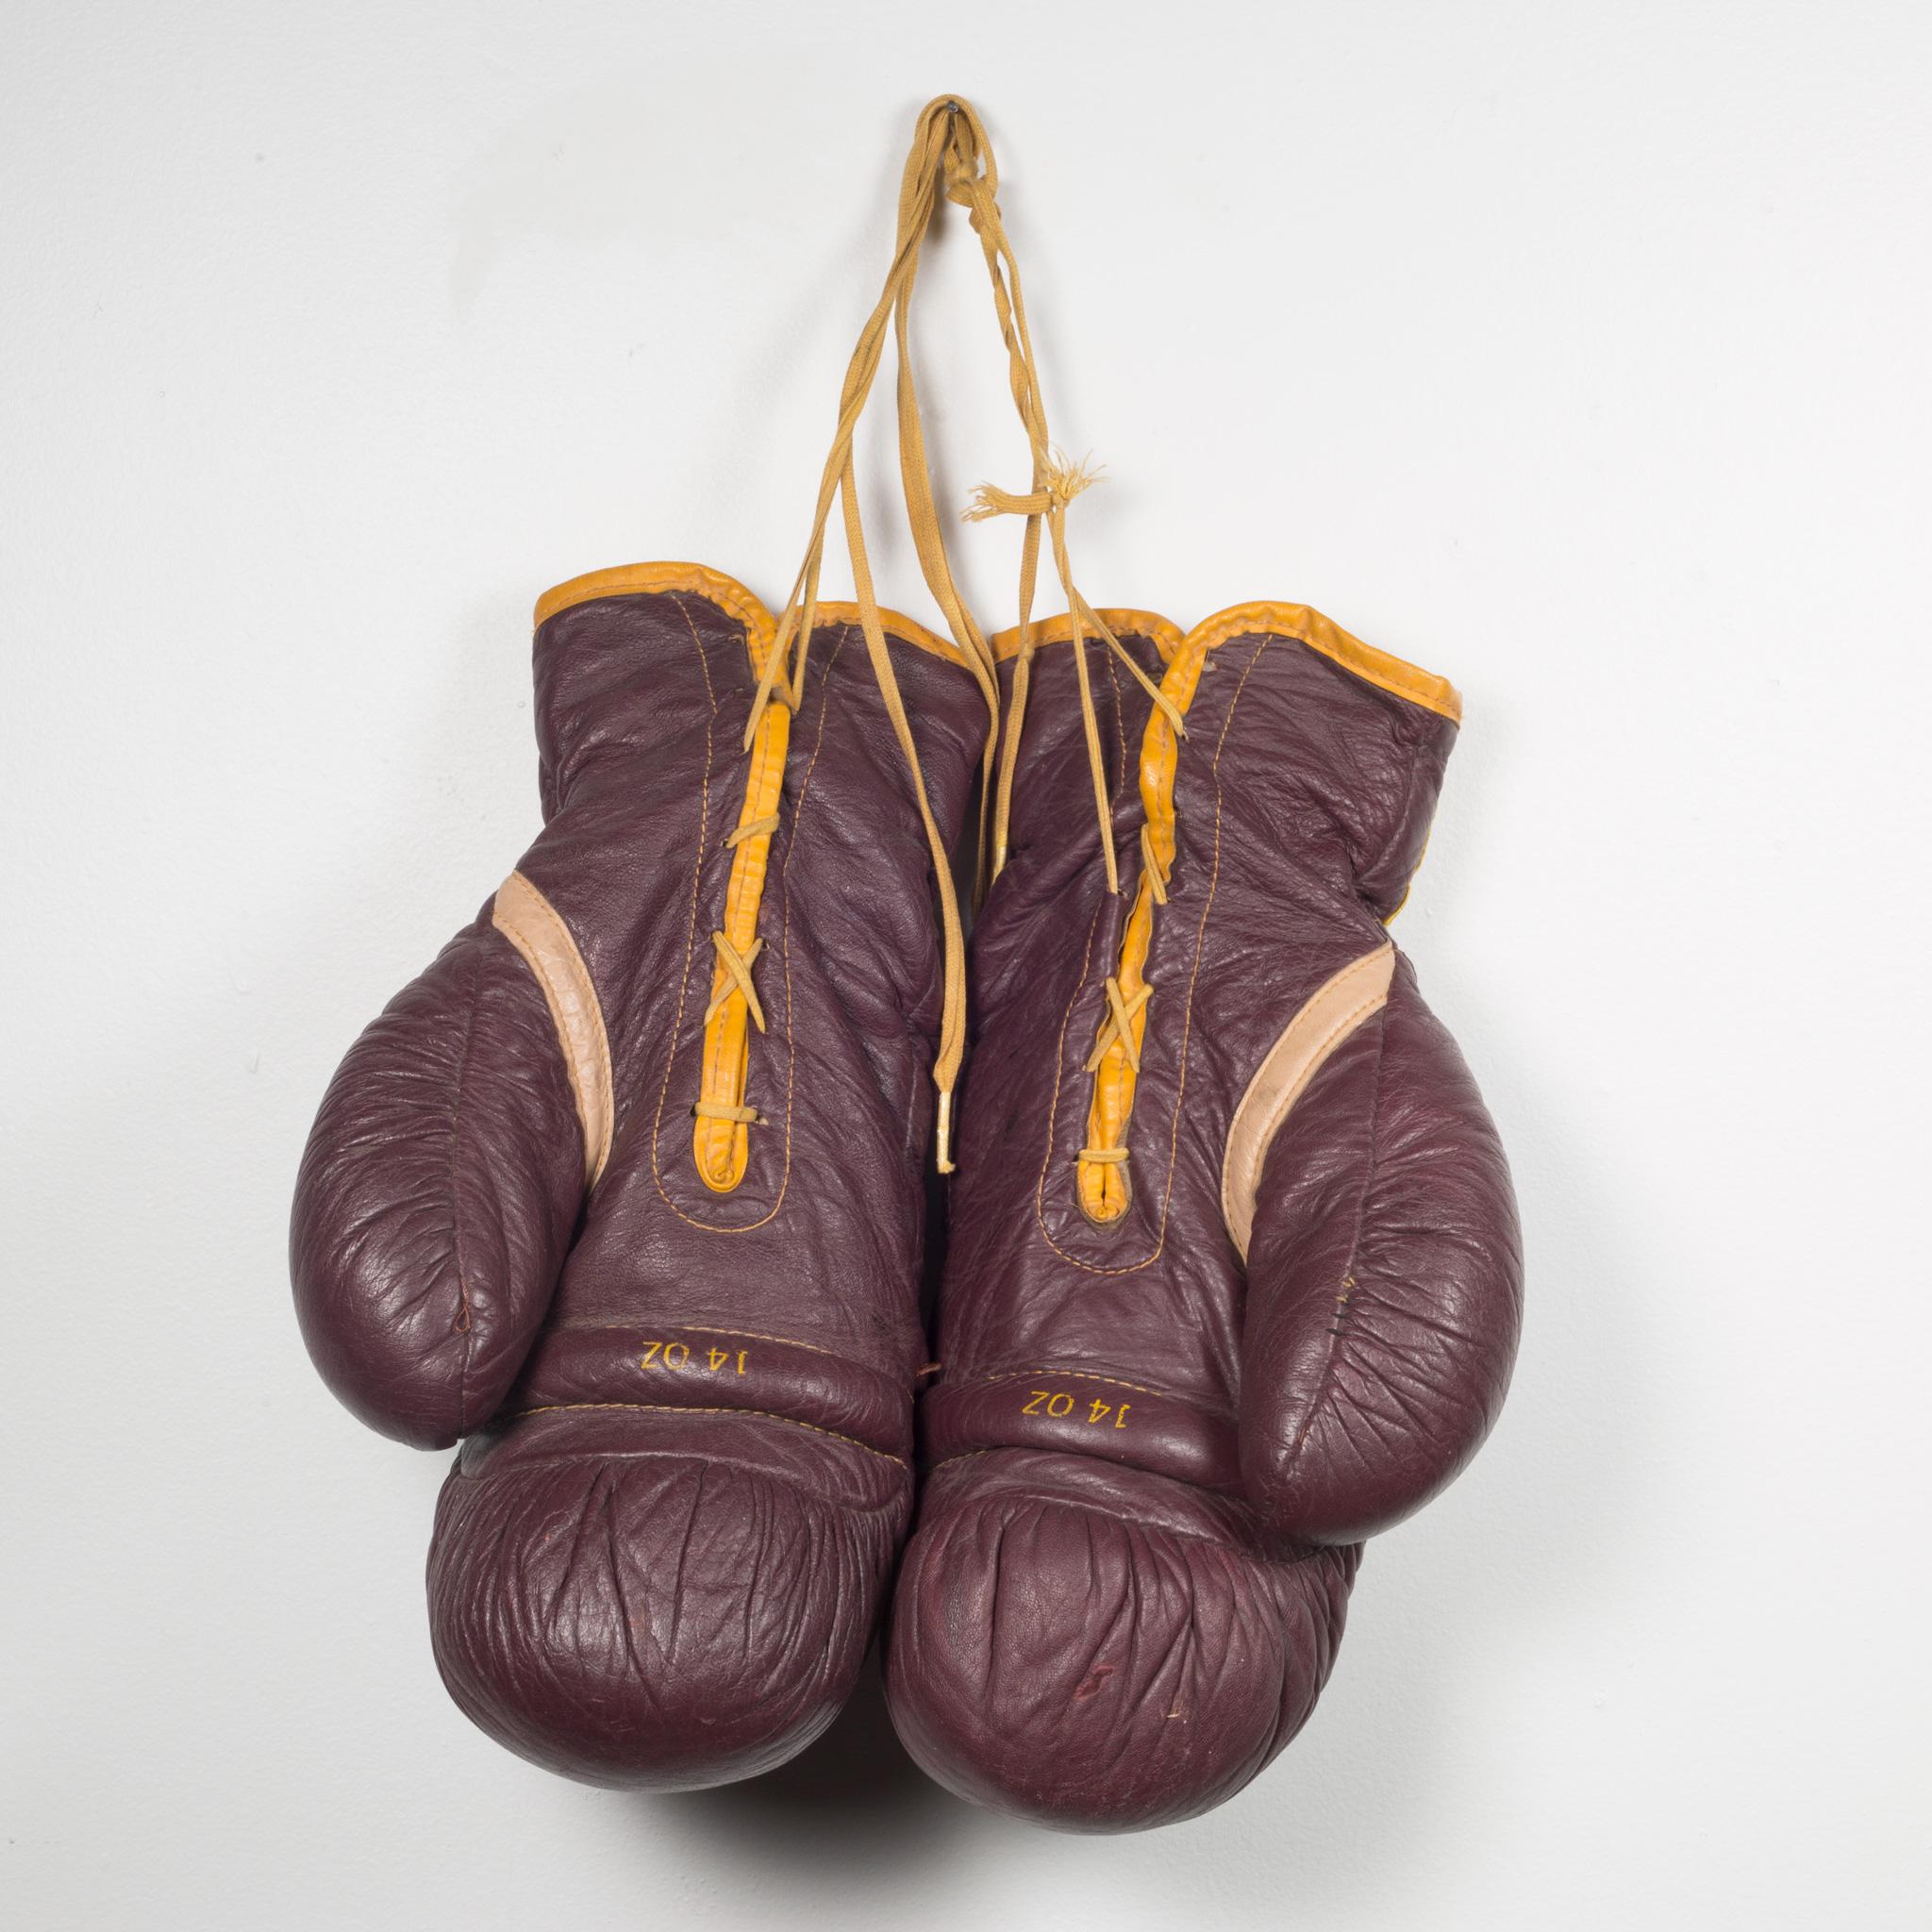 About

This is a original pair of Everlast leather boxing gloves. The boxing gloves are brown leather with gold leather piping, yellow laces and a leather 